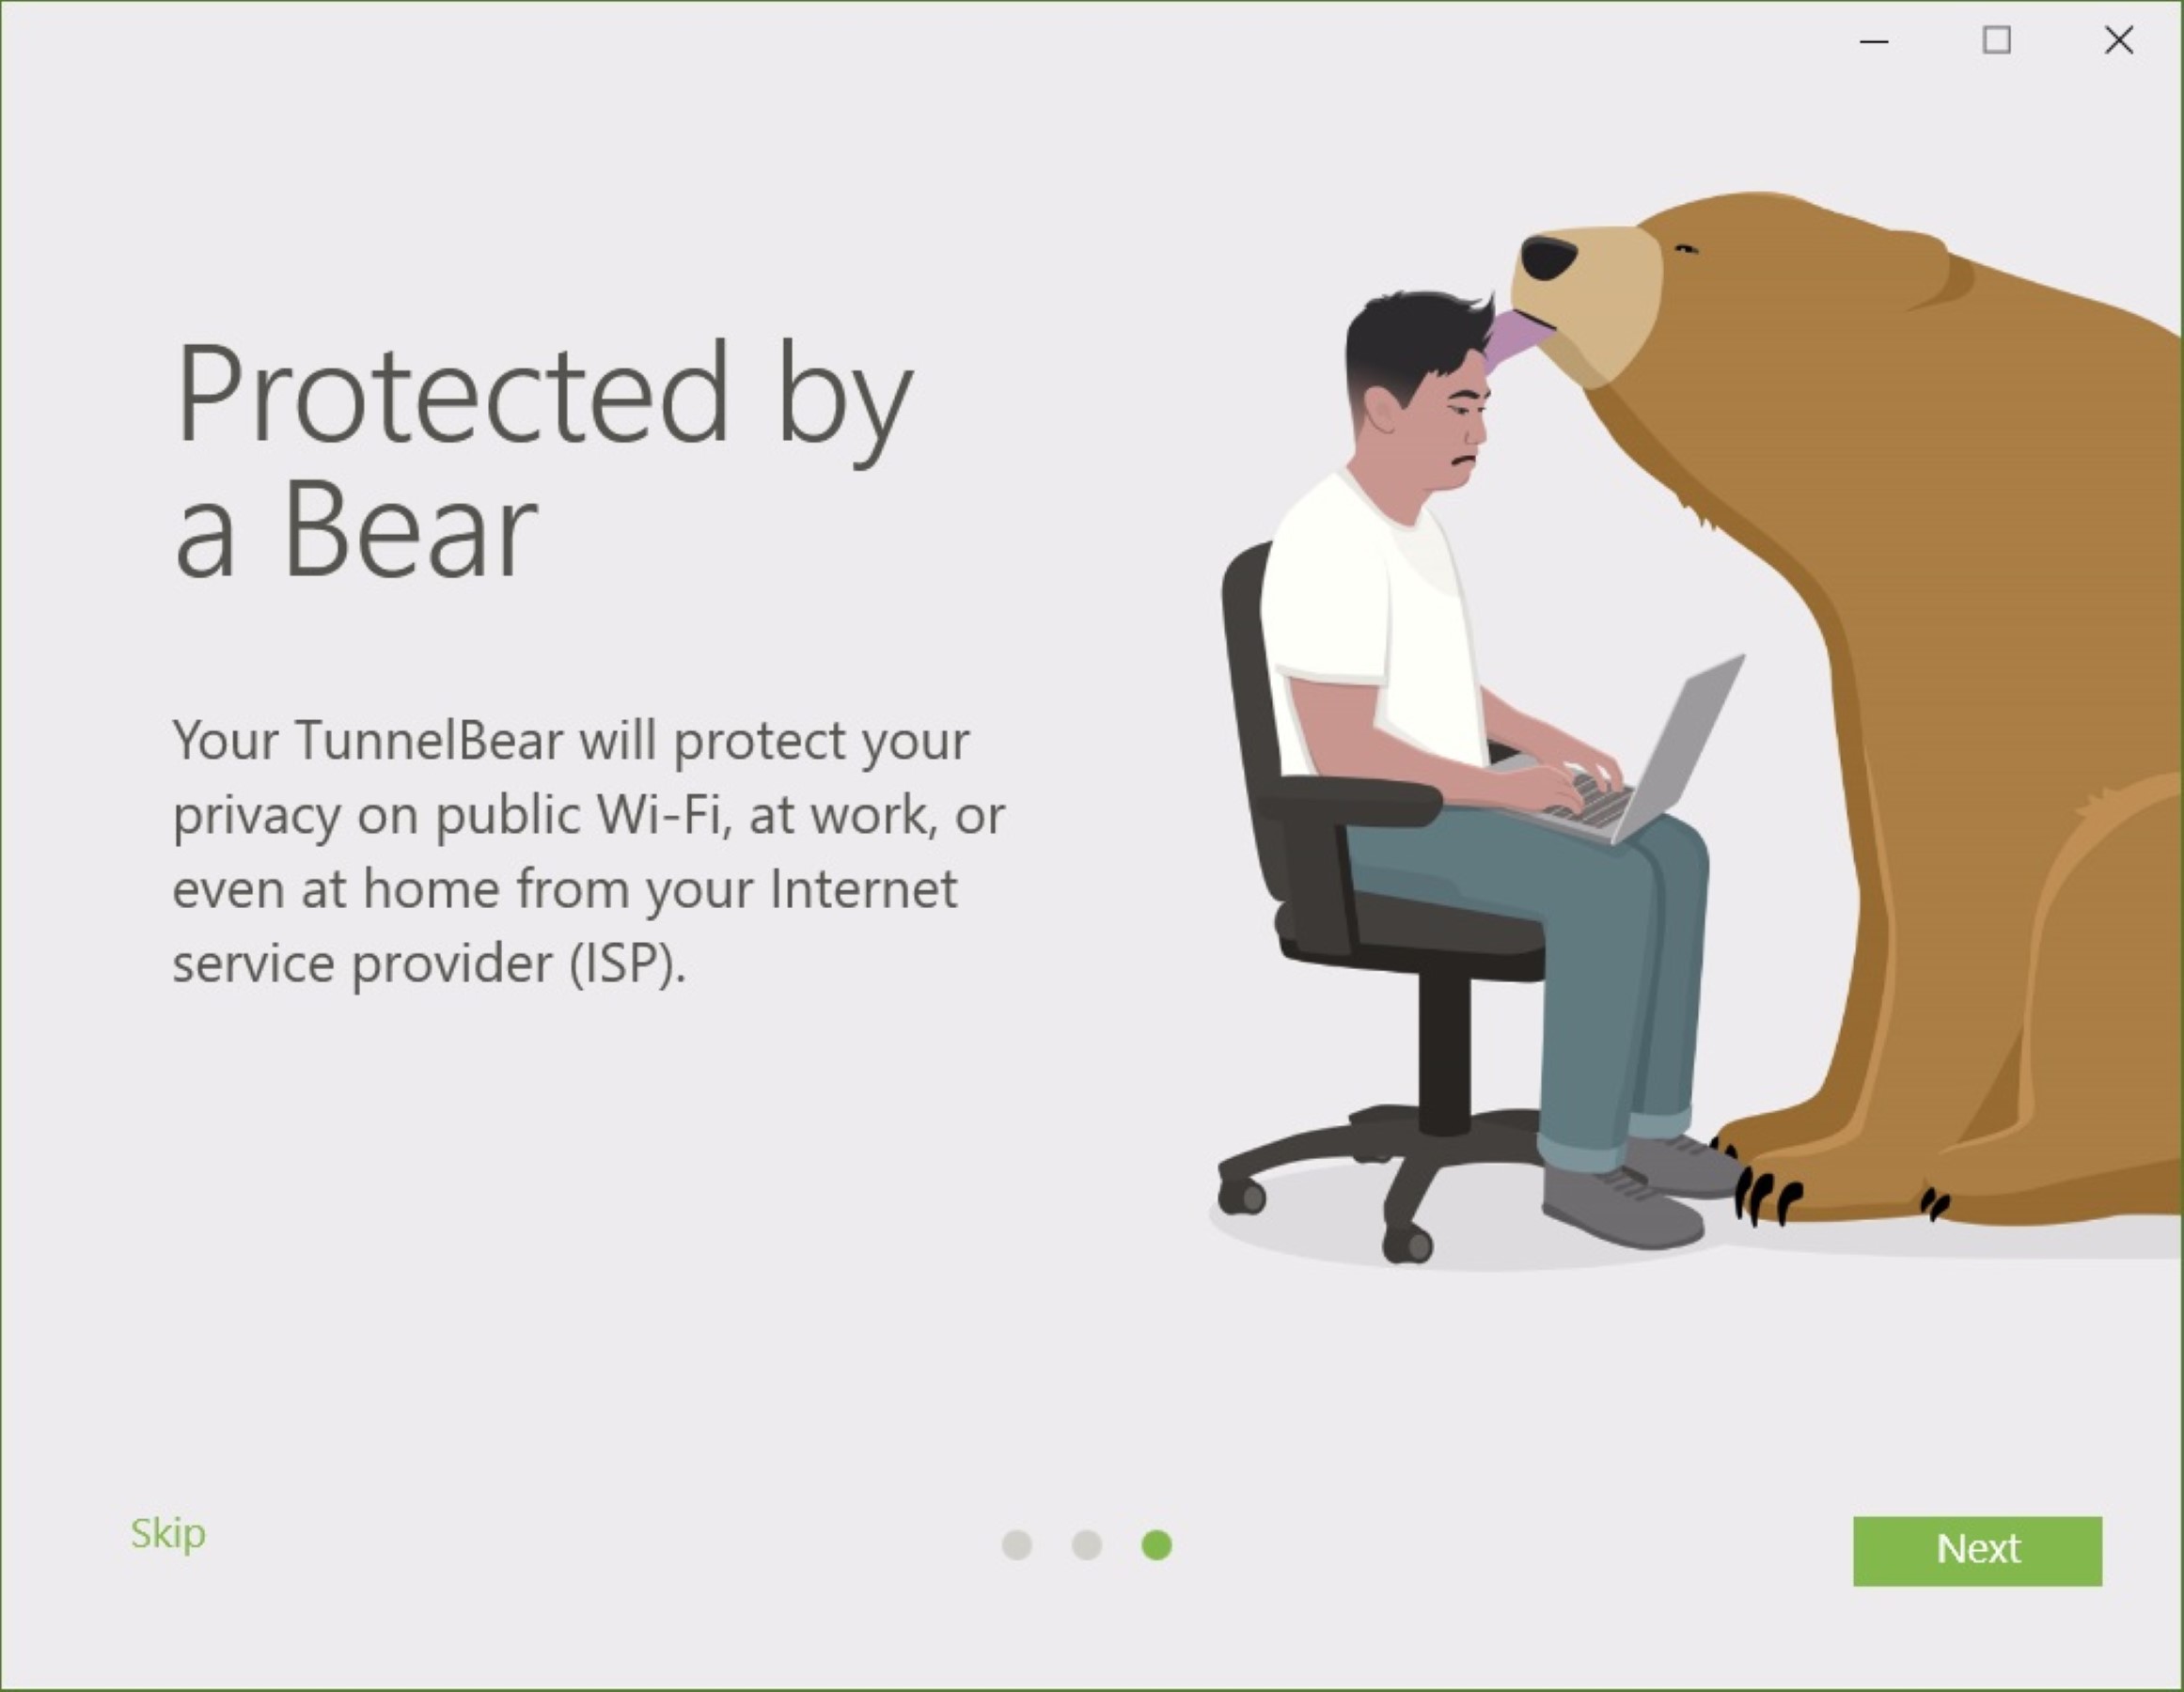 TunnelBear Review 2023: Cost, Features And More